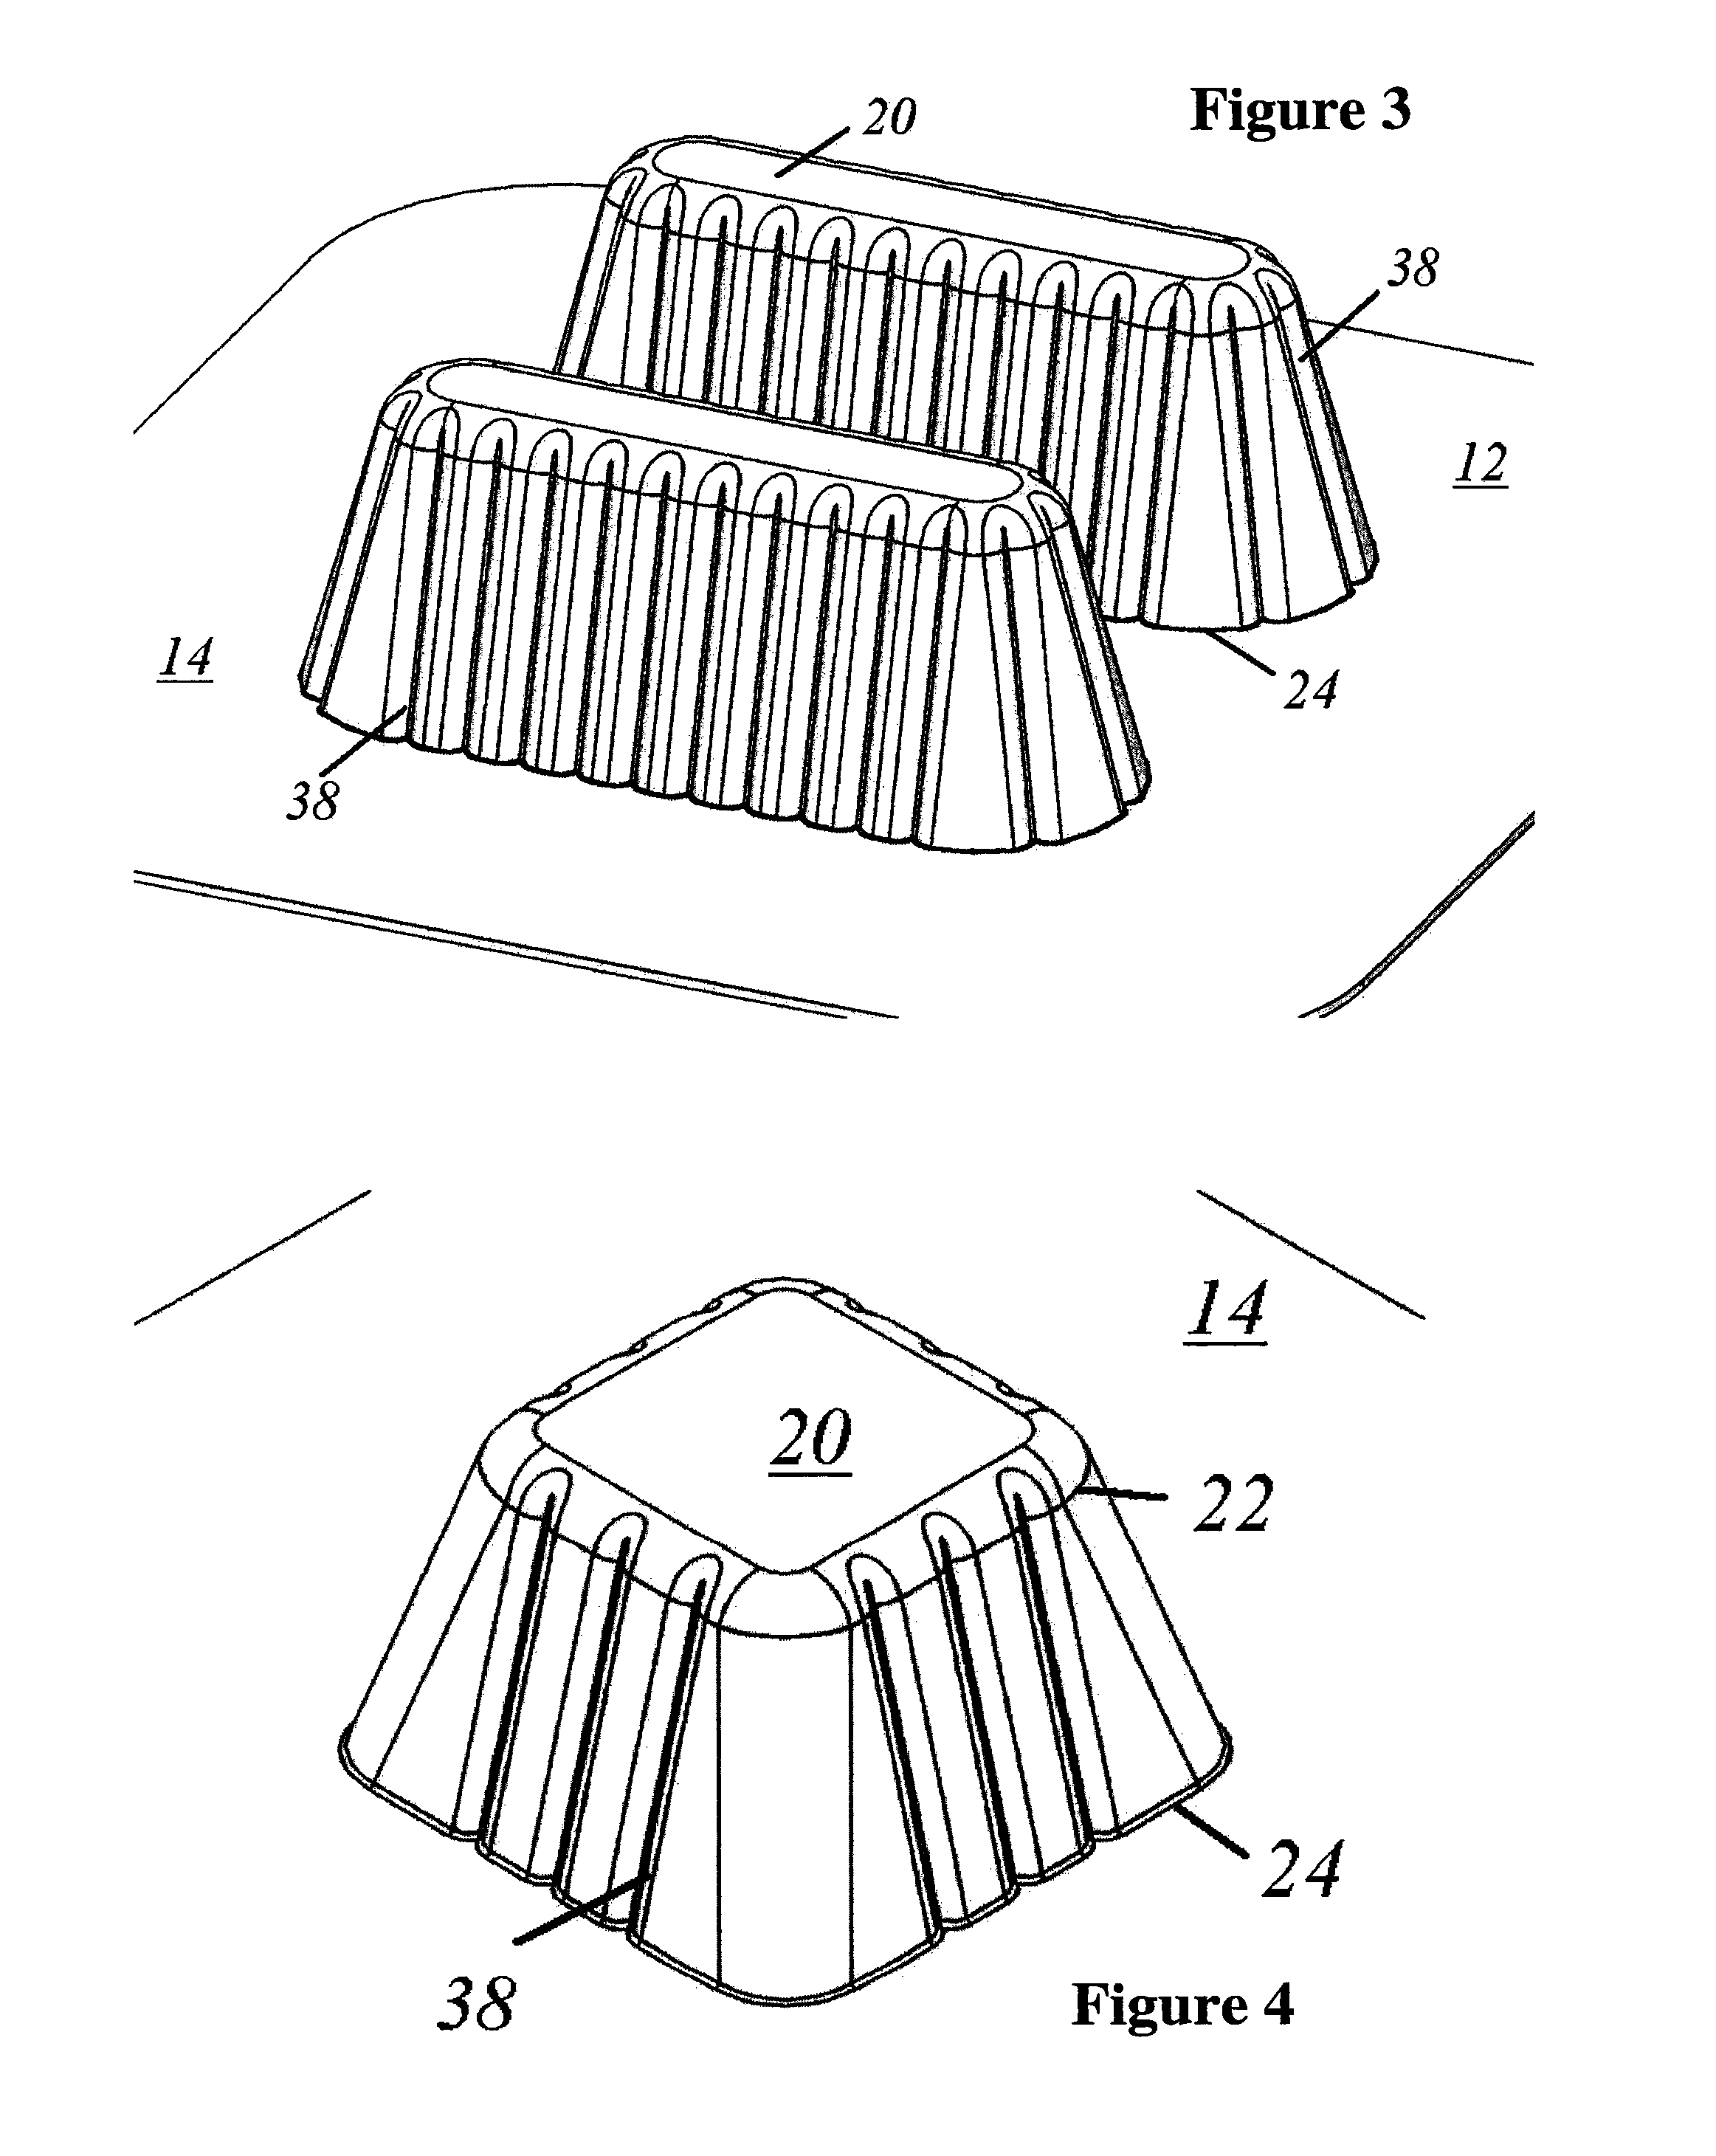 Modular energy absorber with ribbed wall structure